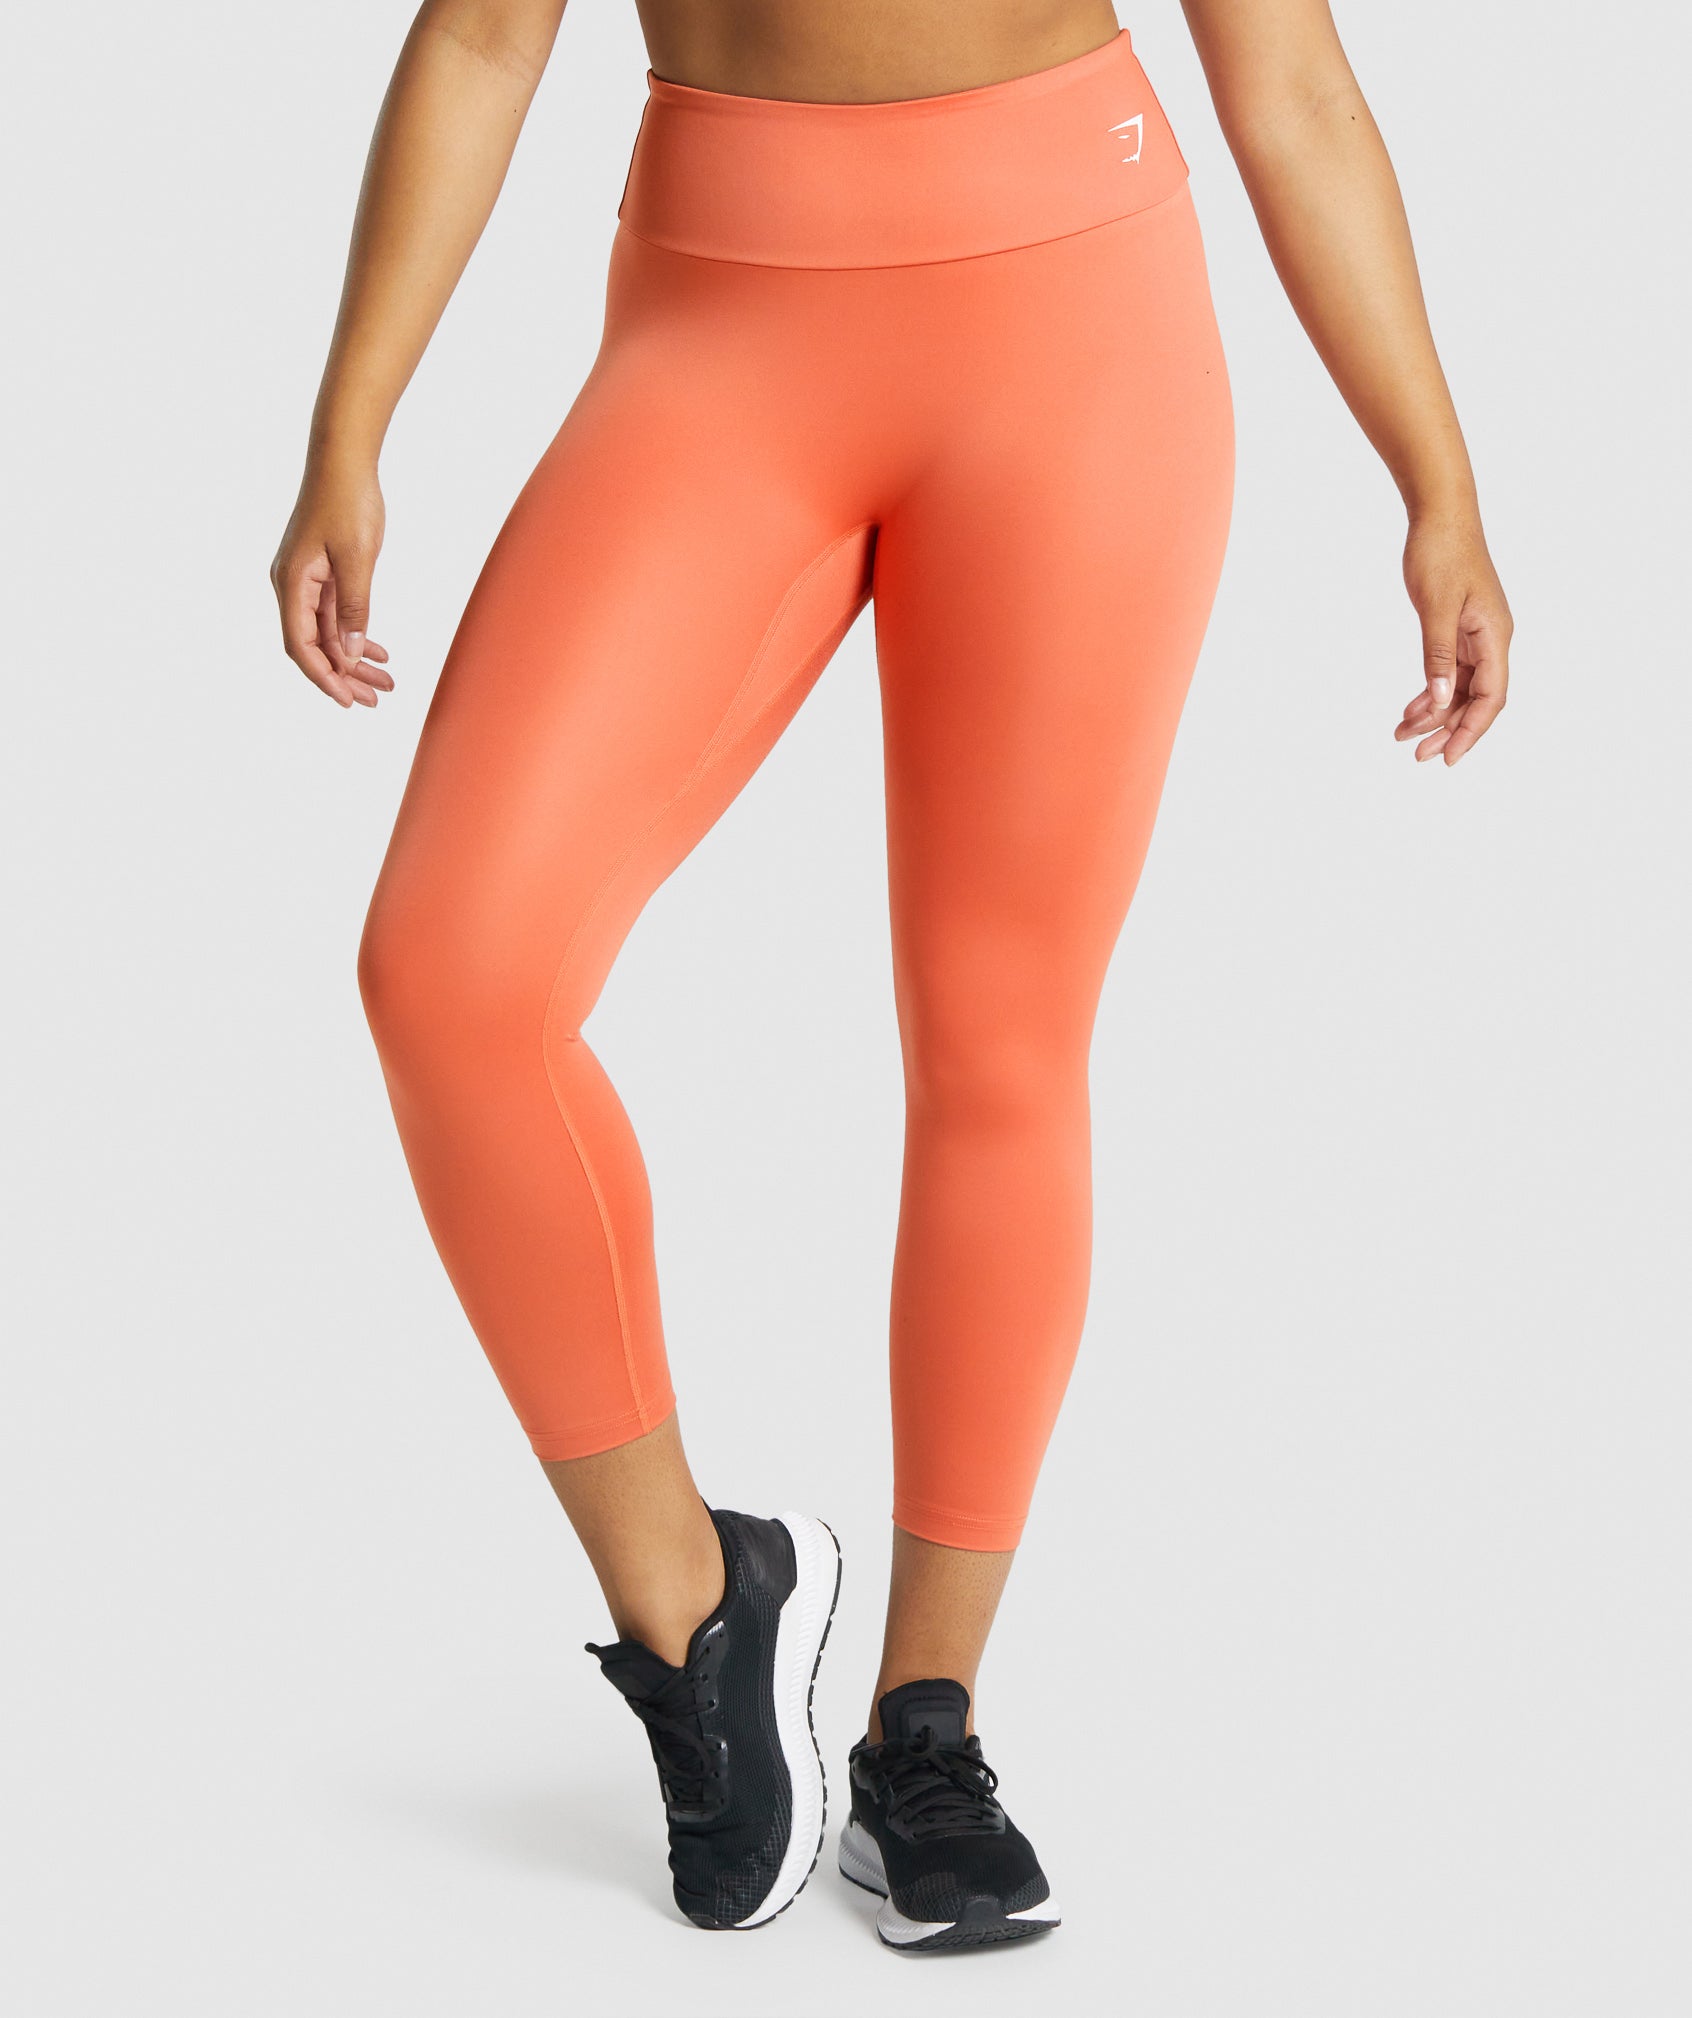 Gymshark Fourth of July Sale 2021: Up to 50% Off Leggings, Tops & More